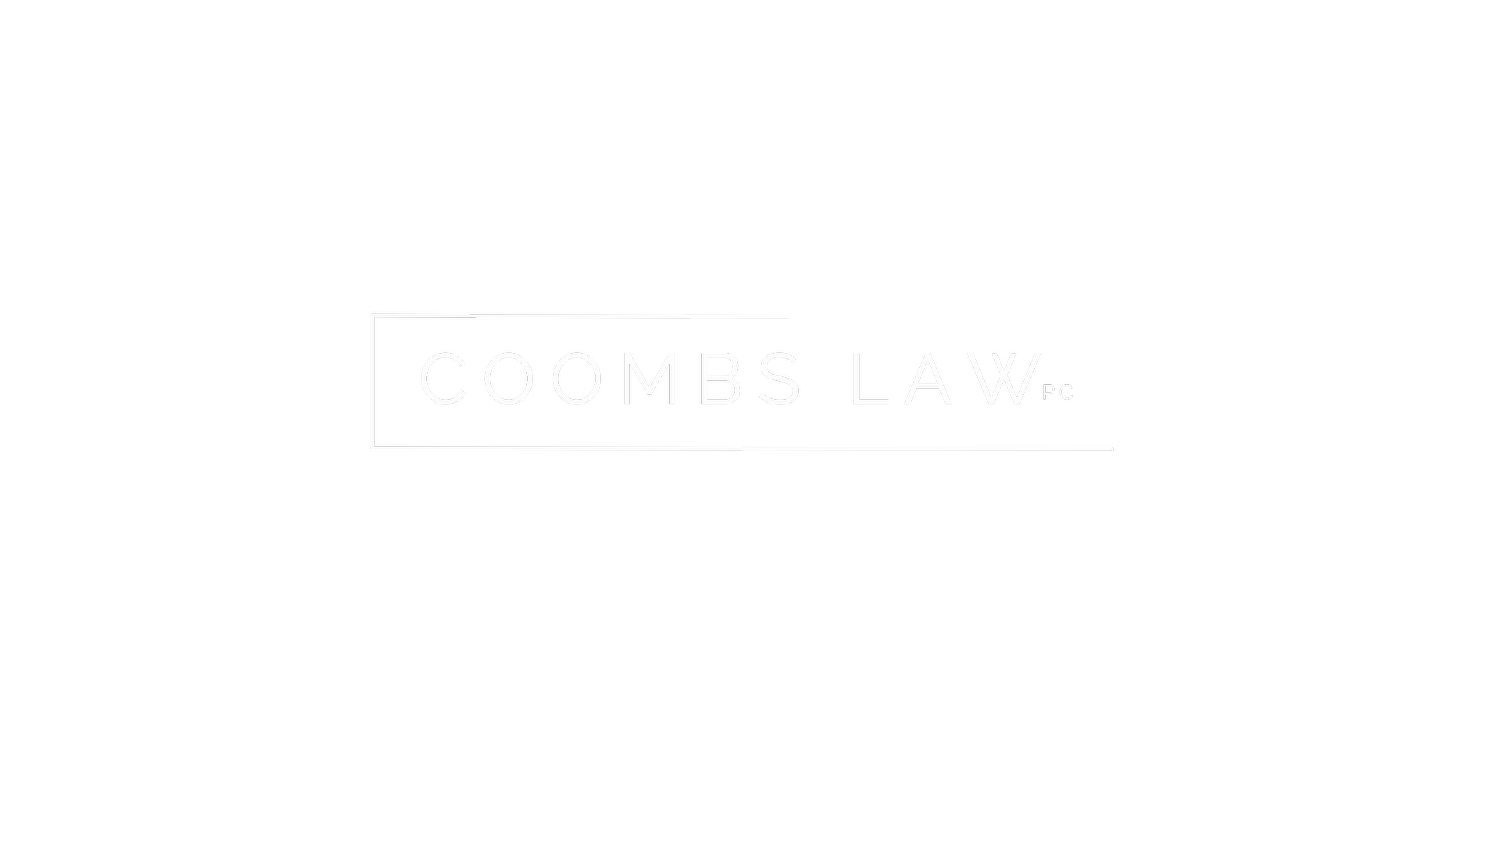 Coombs Law